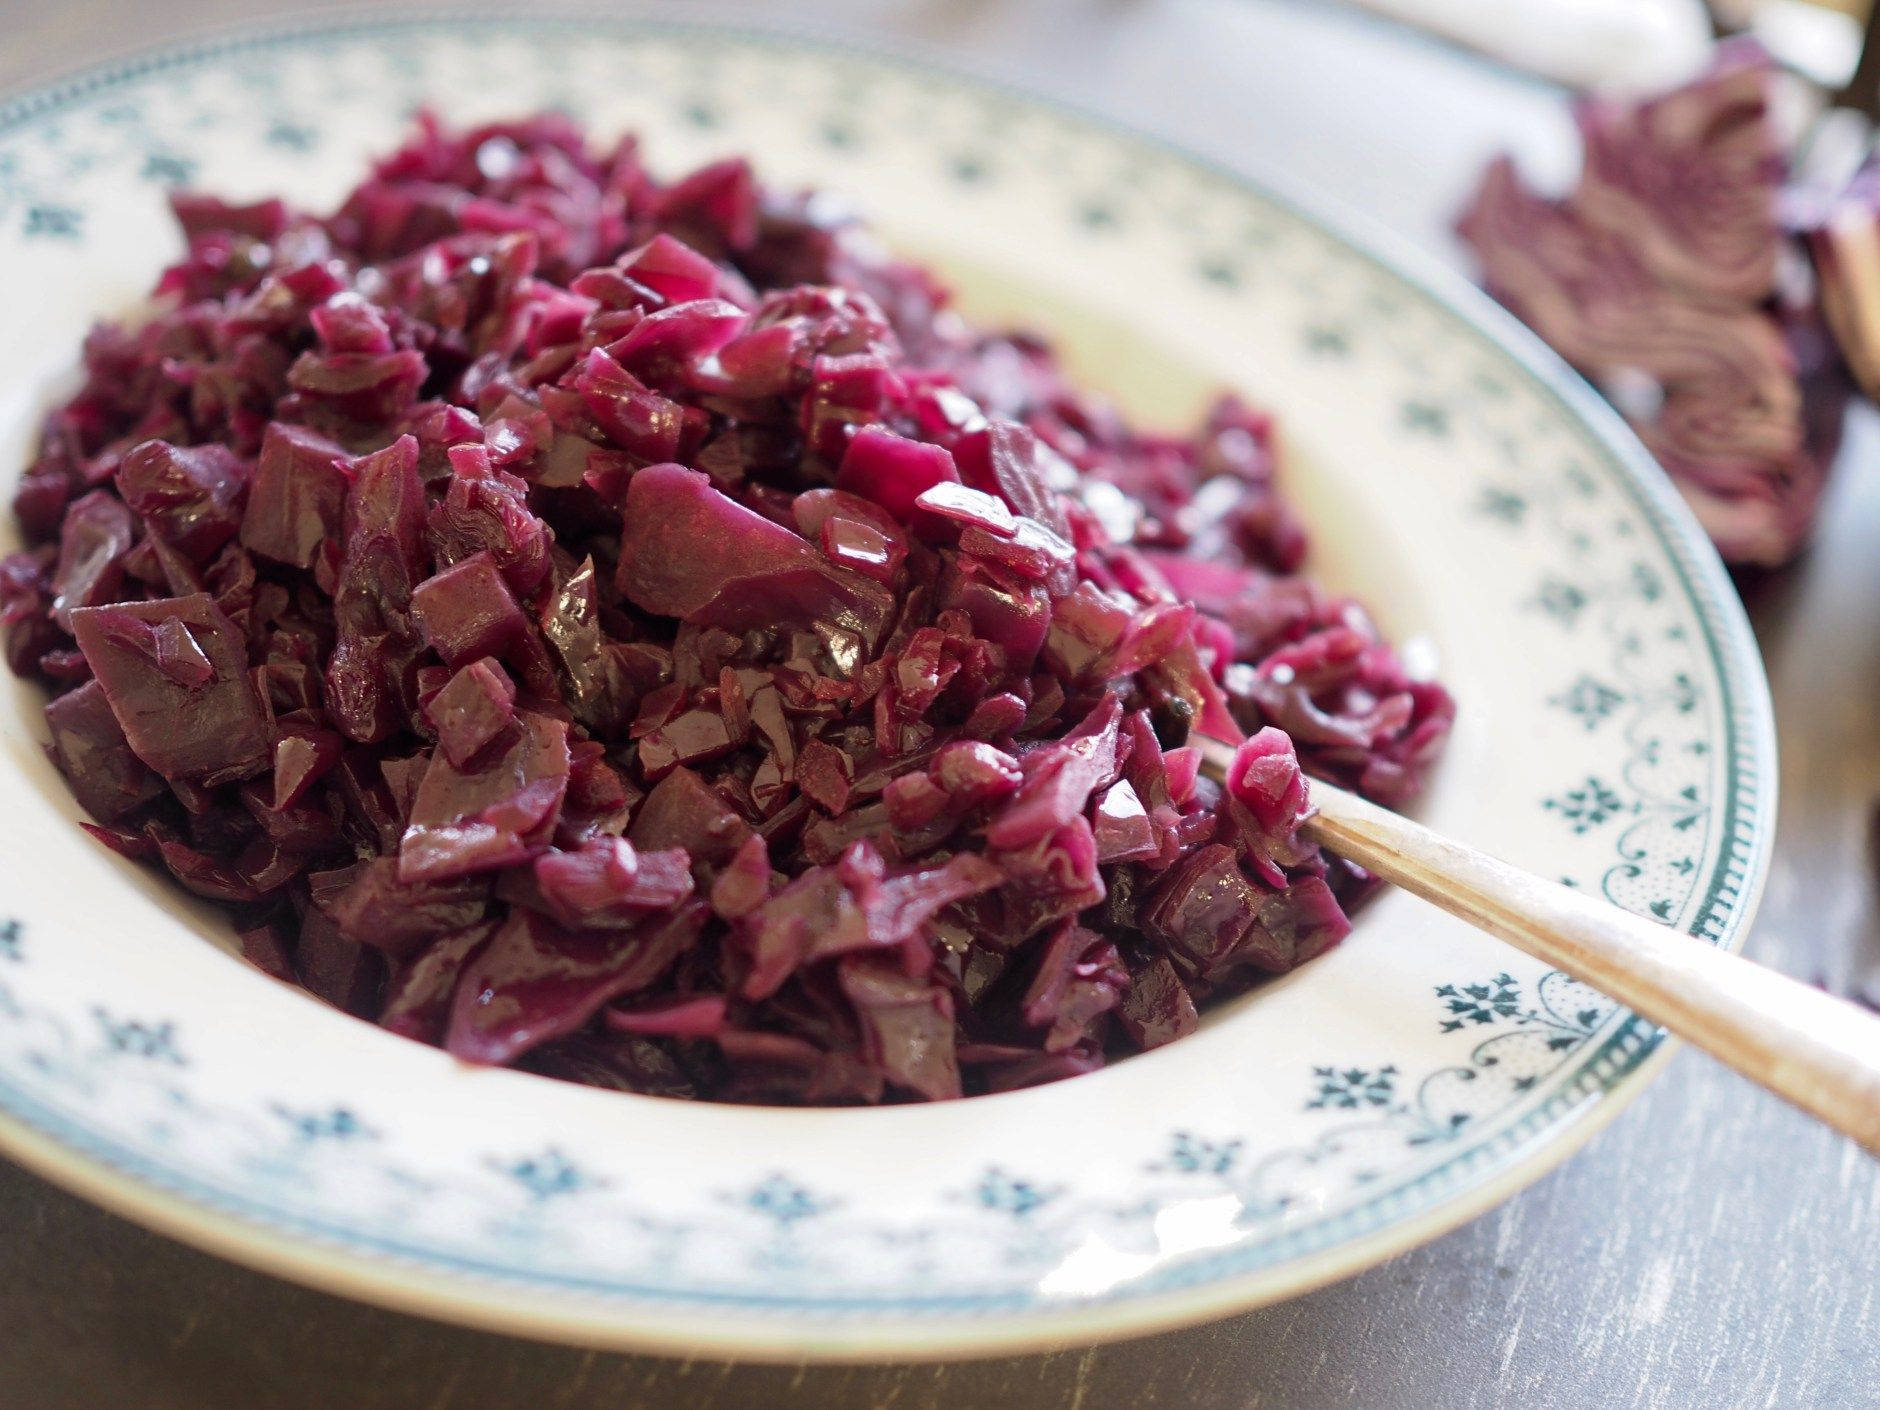 Norwegian Sweet And Sour Braised Red Cabbage Vegetable Dish Wallpaper